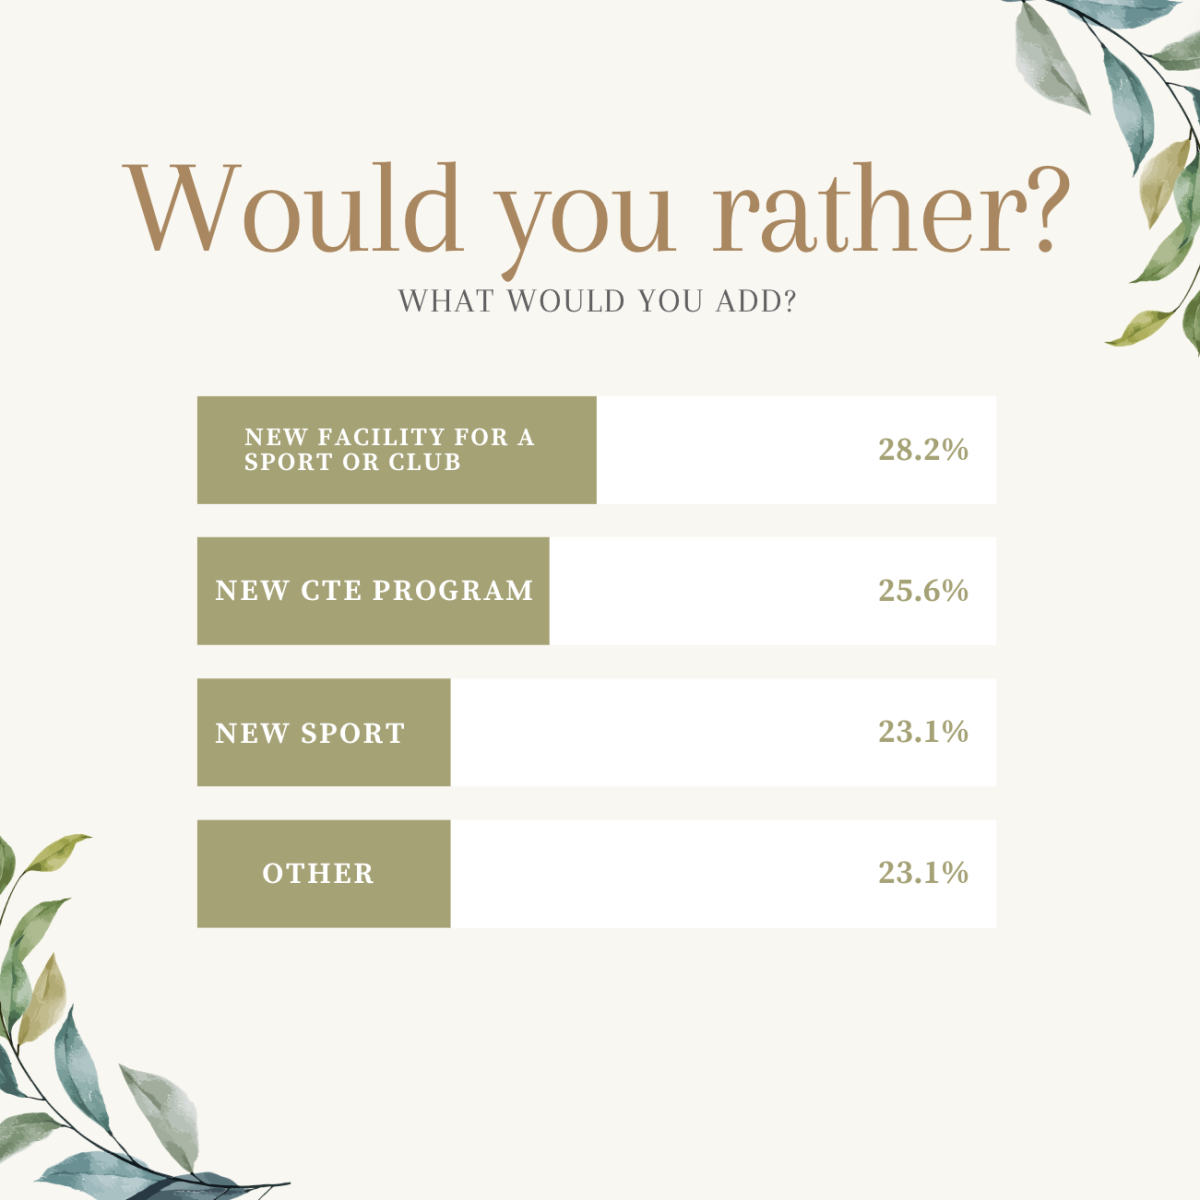 Infographic made by Kara Kotowski on Canva showing the chart on the responses in the survey.